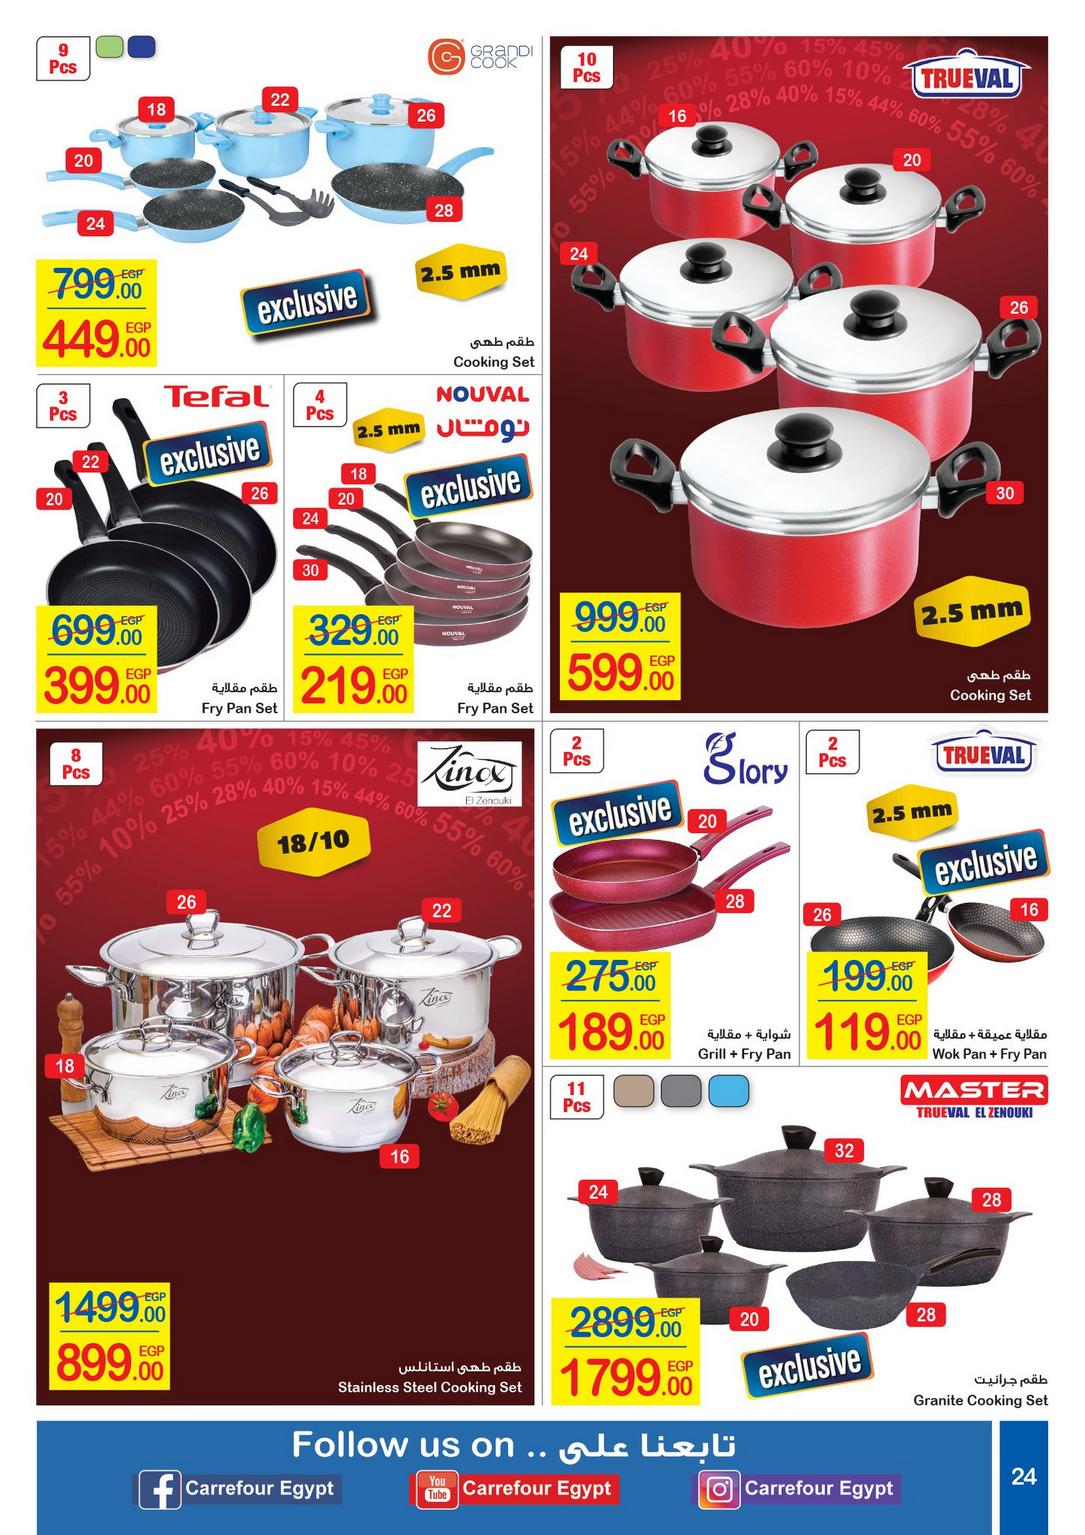 Carrefour Deals from 1/1 till 14/1 | Carrefour Egypt 25